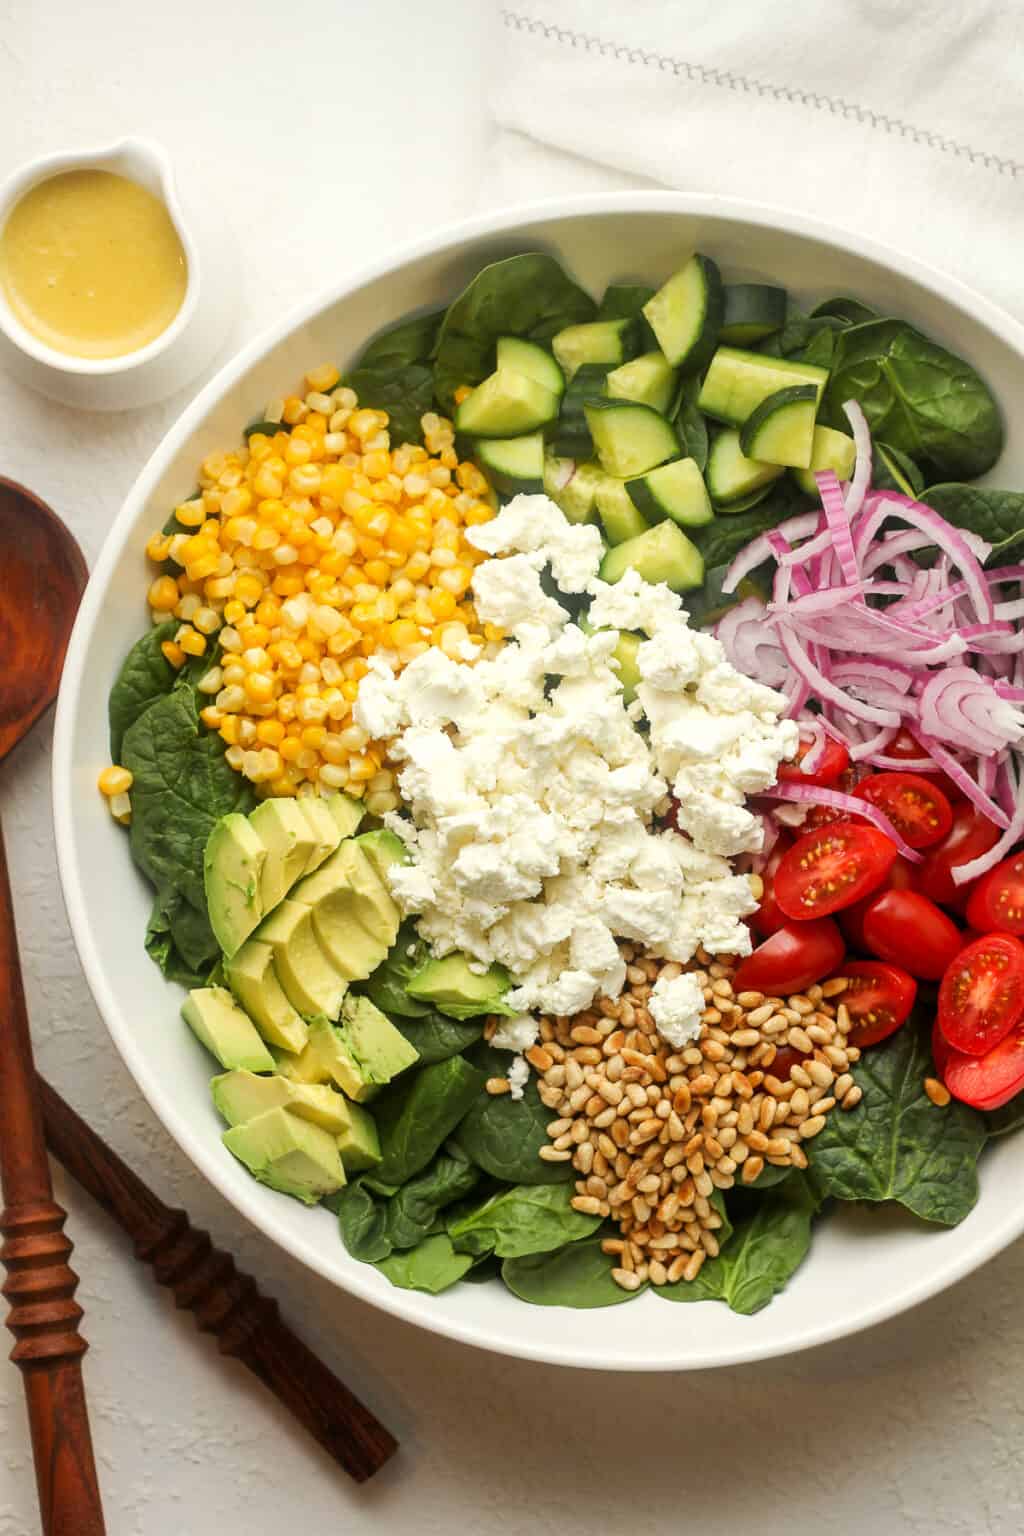 Spinach and Goat Cheese Salad - SueBee Homemaker